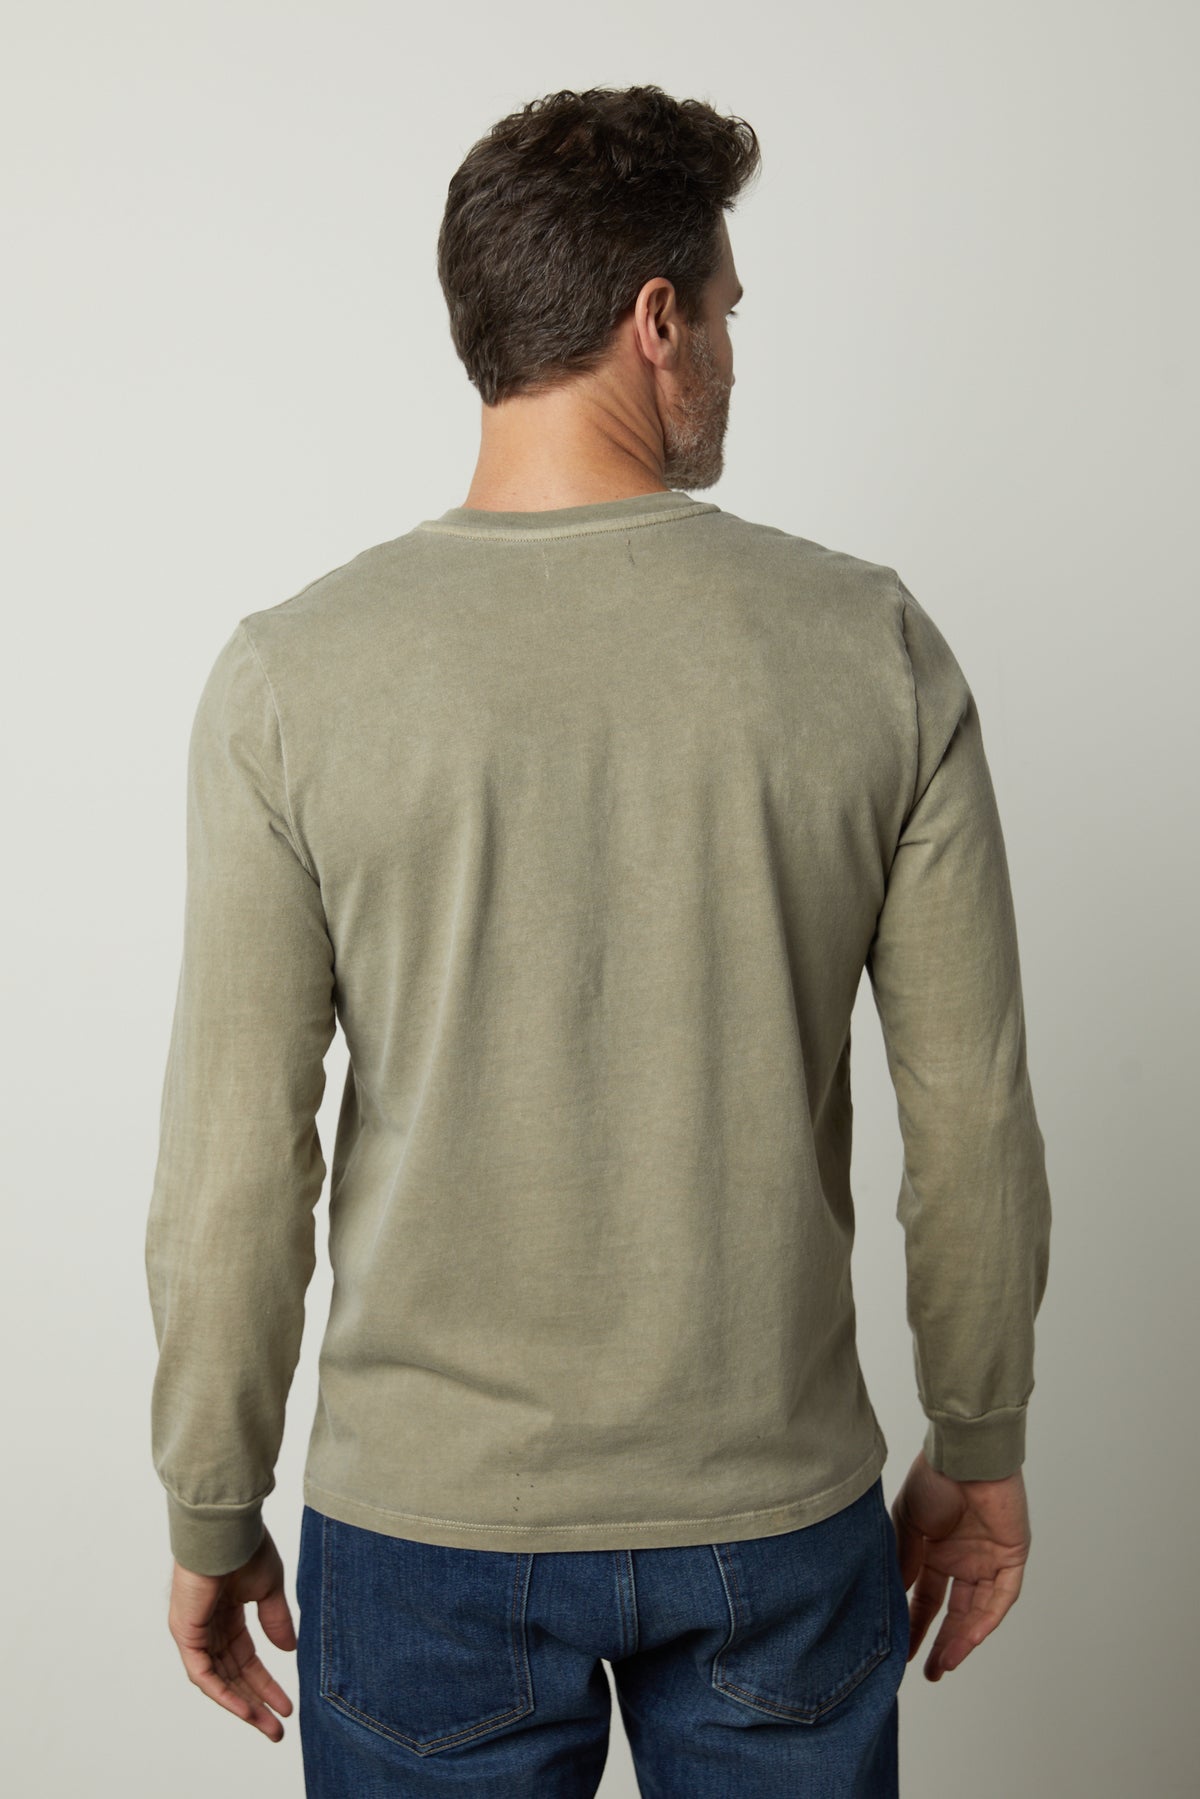   The back view of a man wearing Velvet by Graham & Spencer REMI HENLEY jeans and a long-sleeved shirt. 